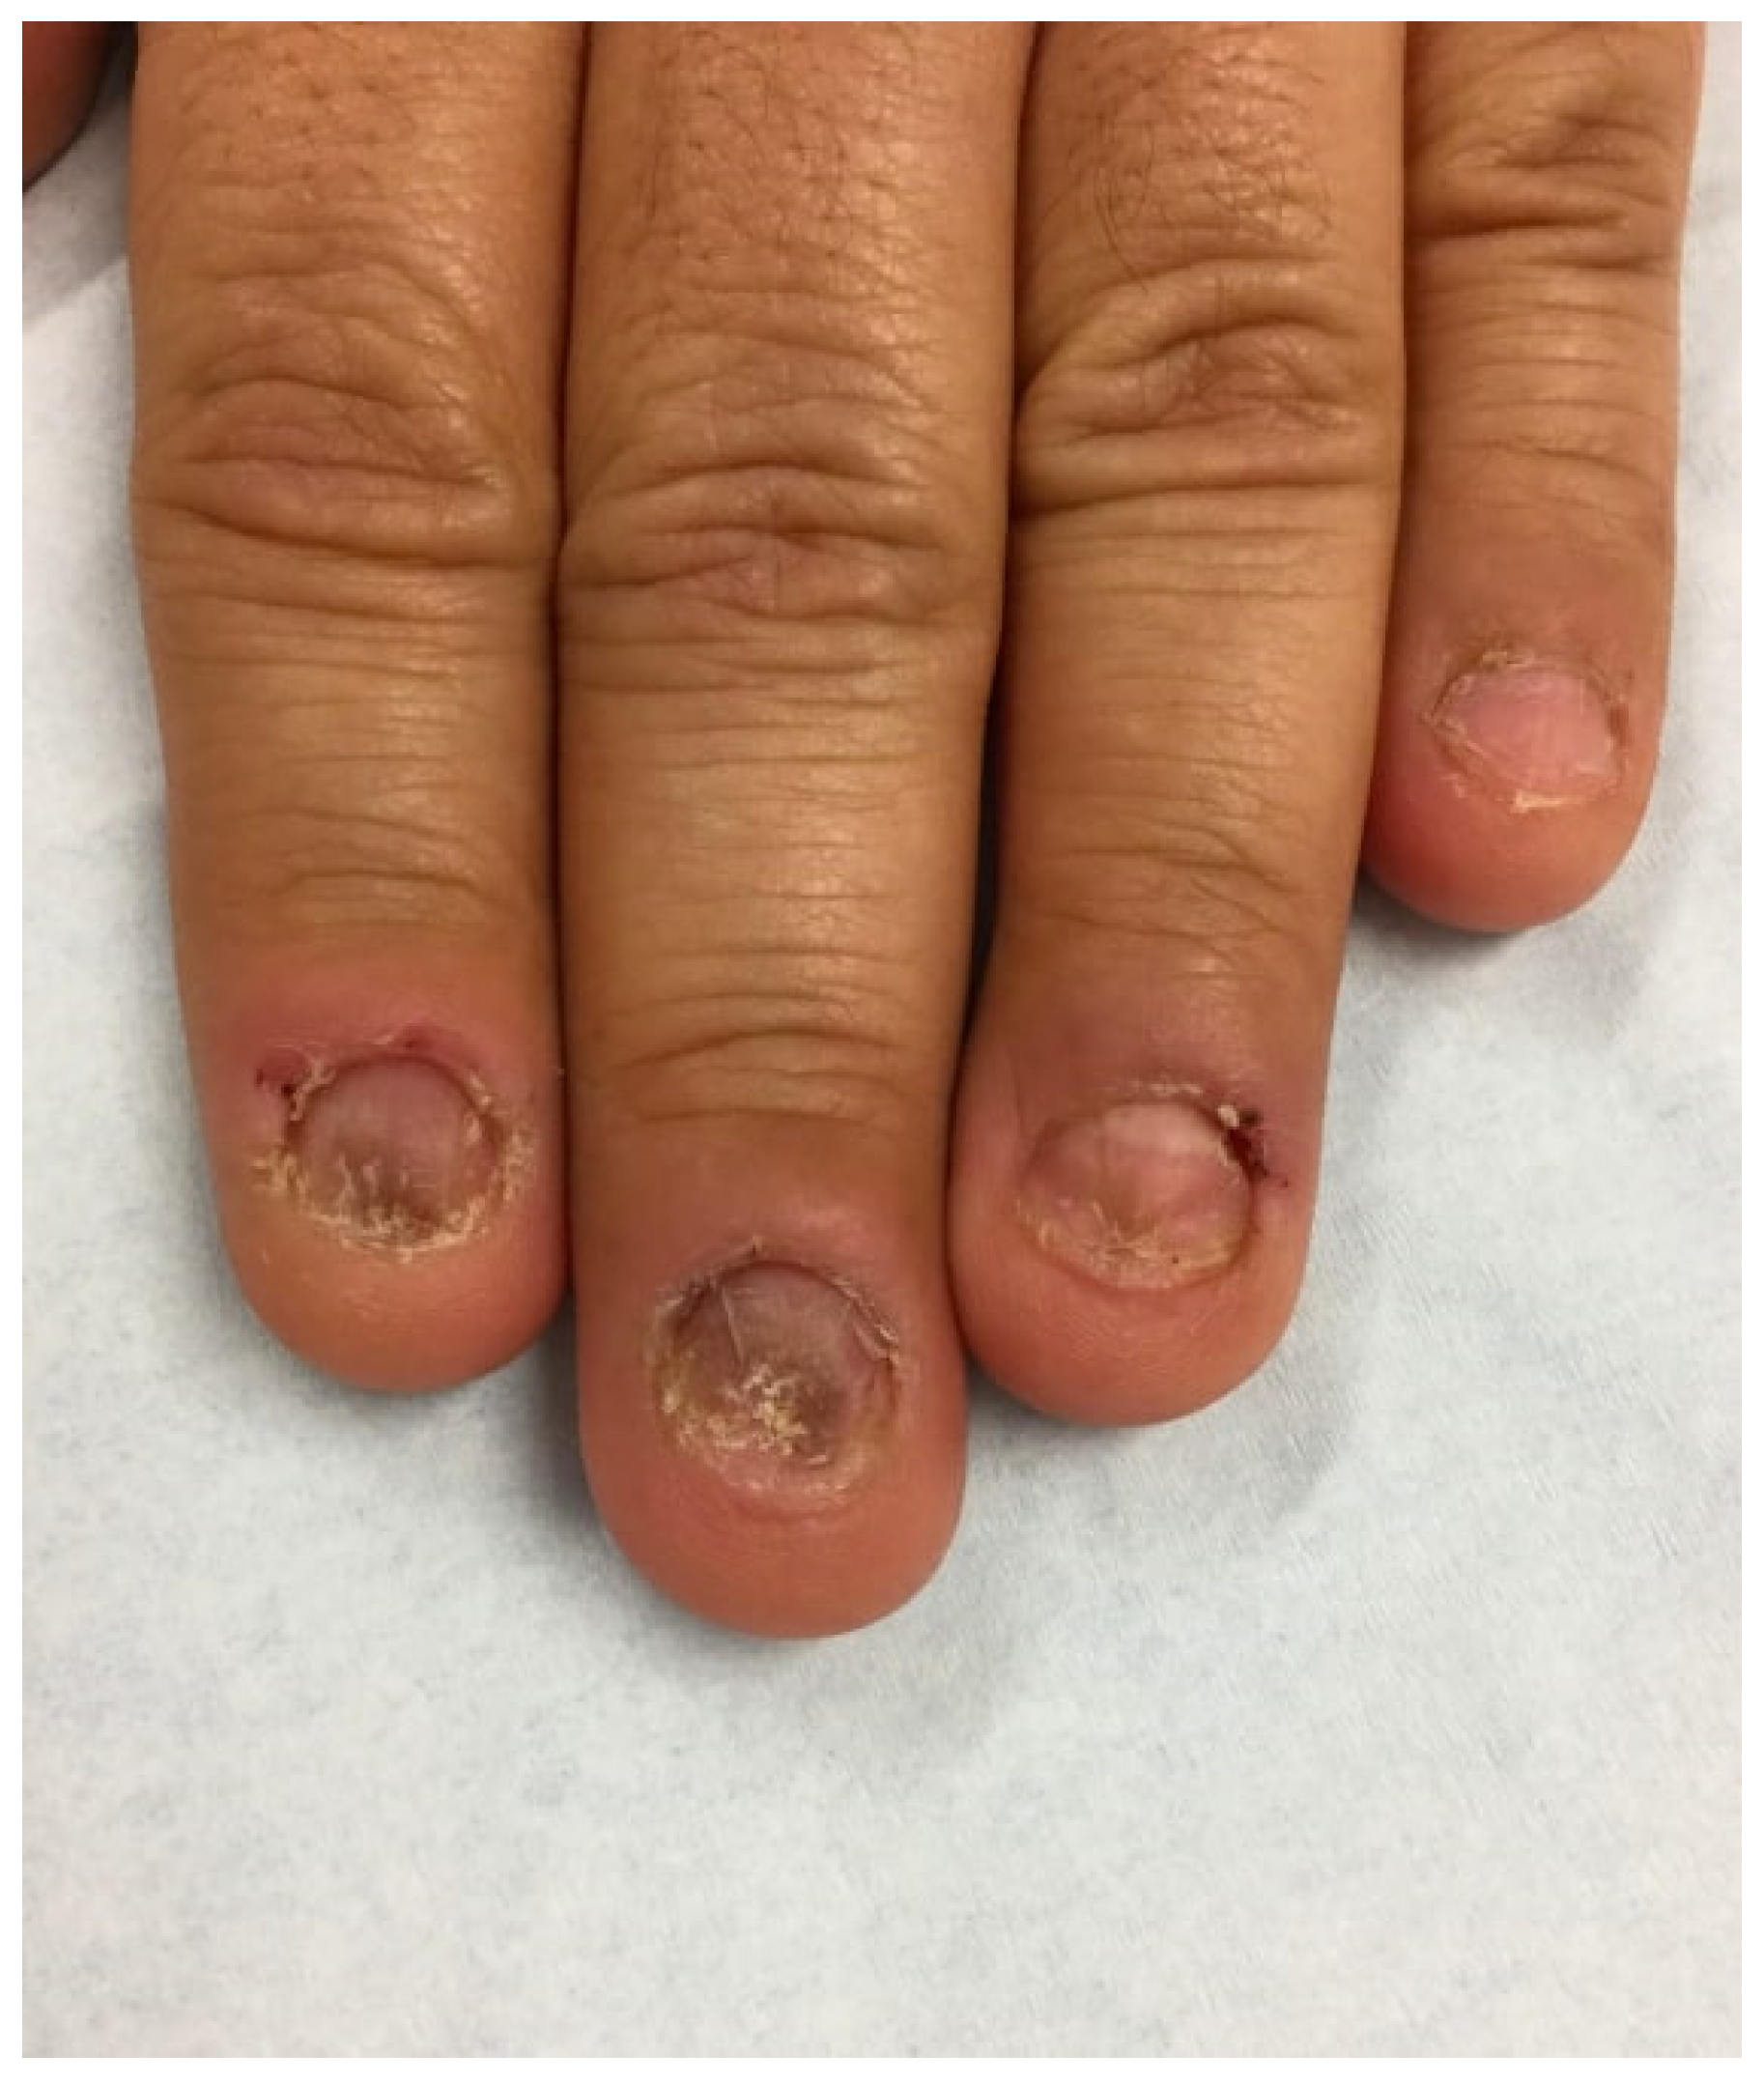 An Atlas of Nail Disorders, Part 14 | Consultant360